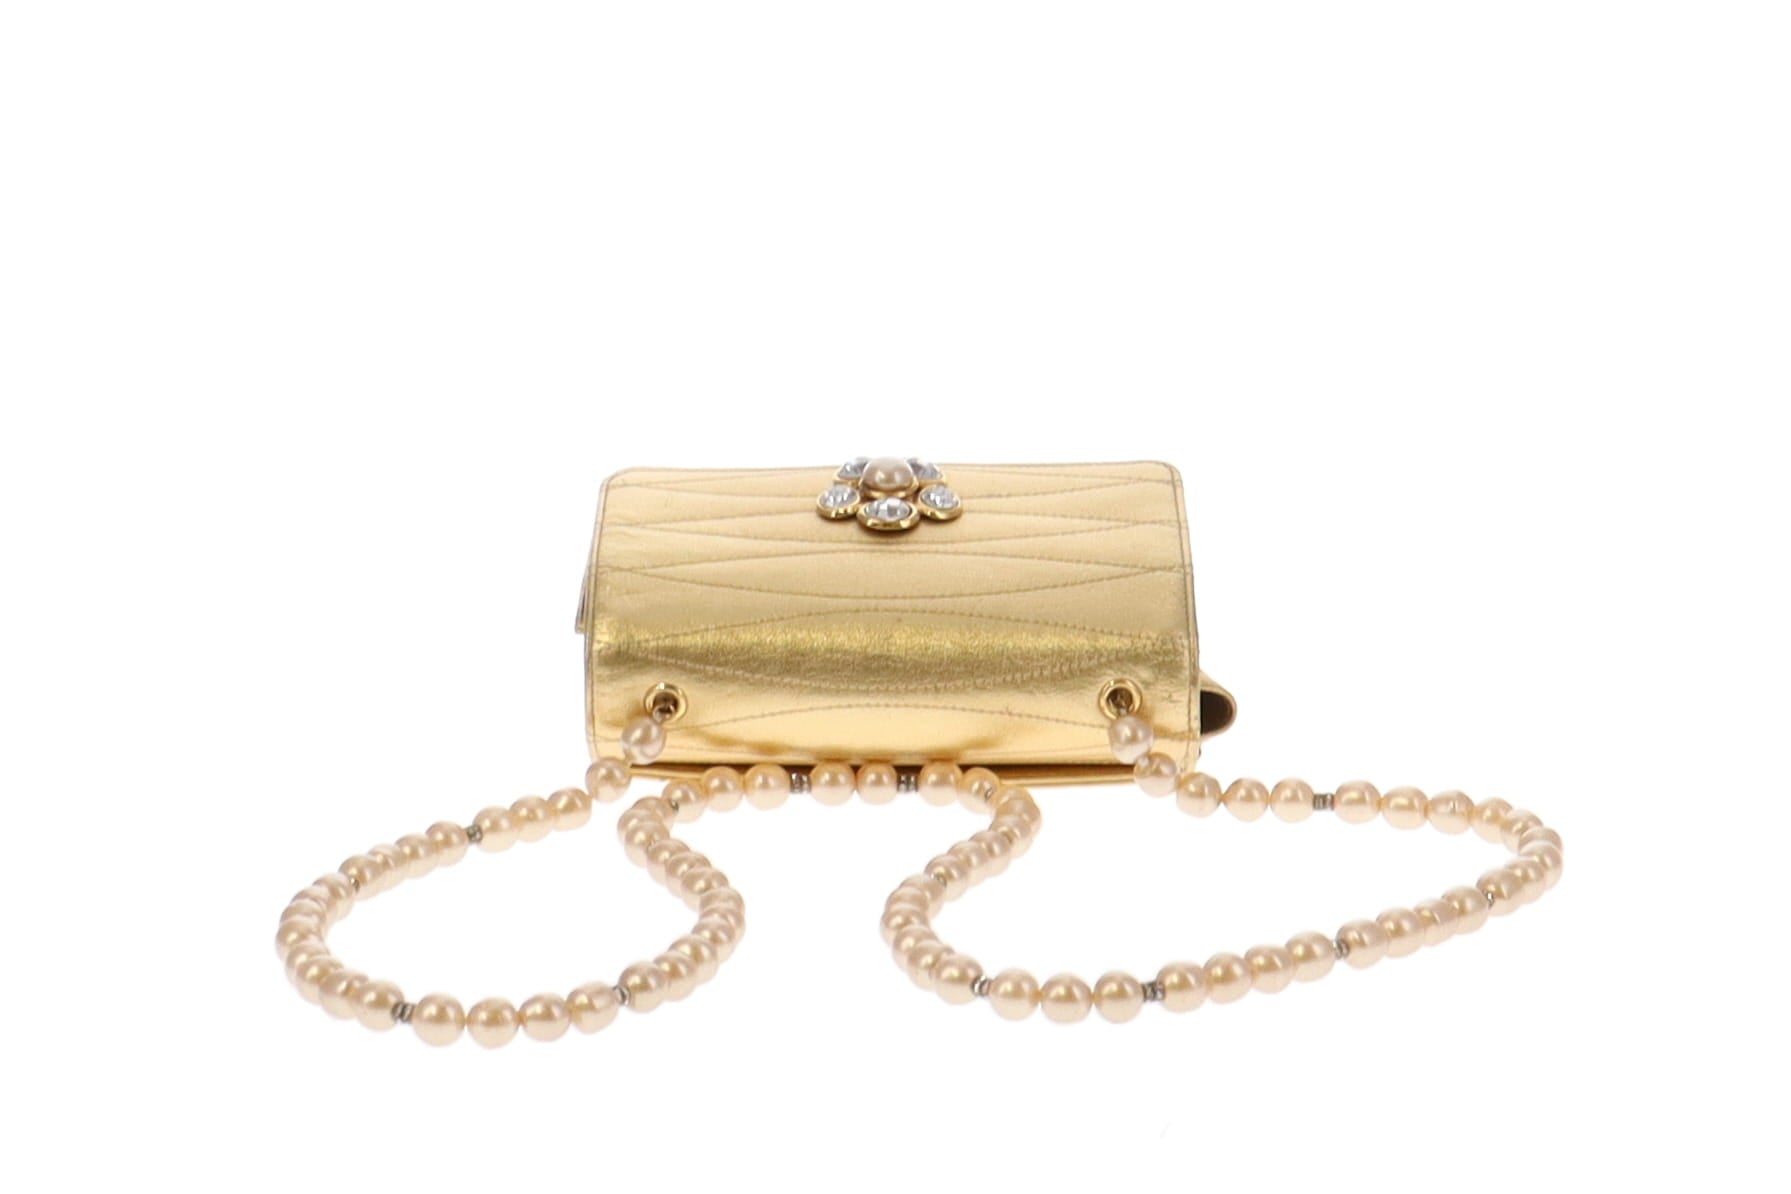 Chanel Strass Pearl Evening Bag